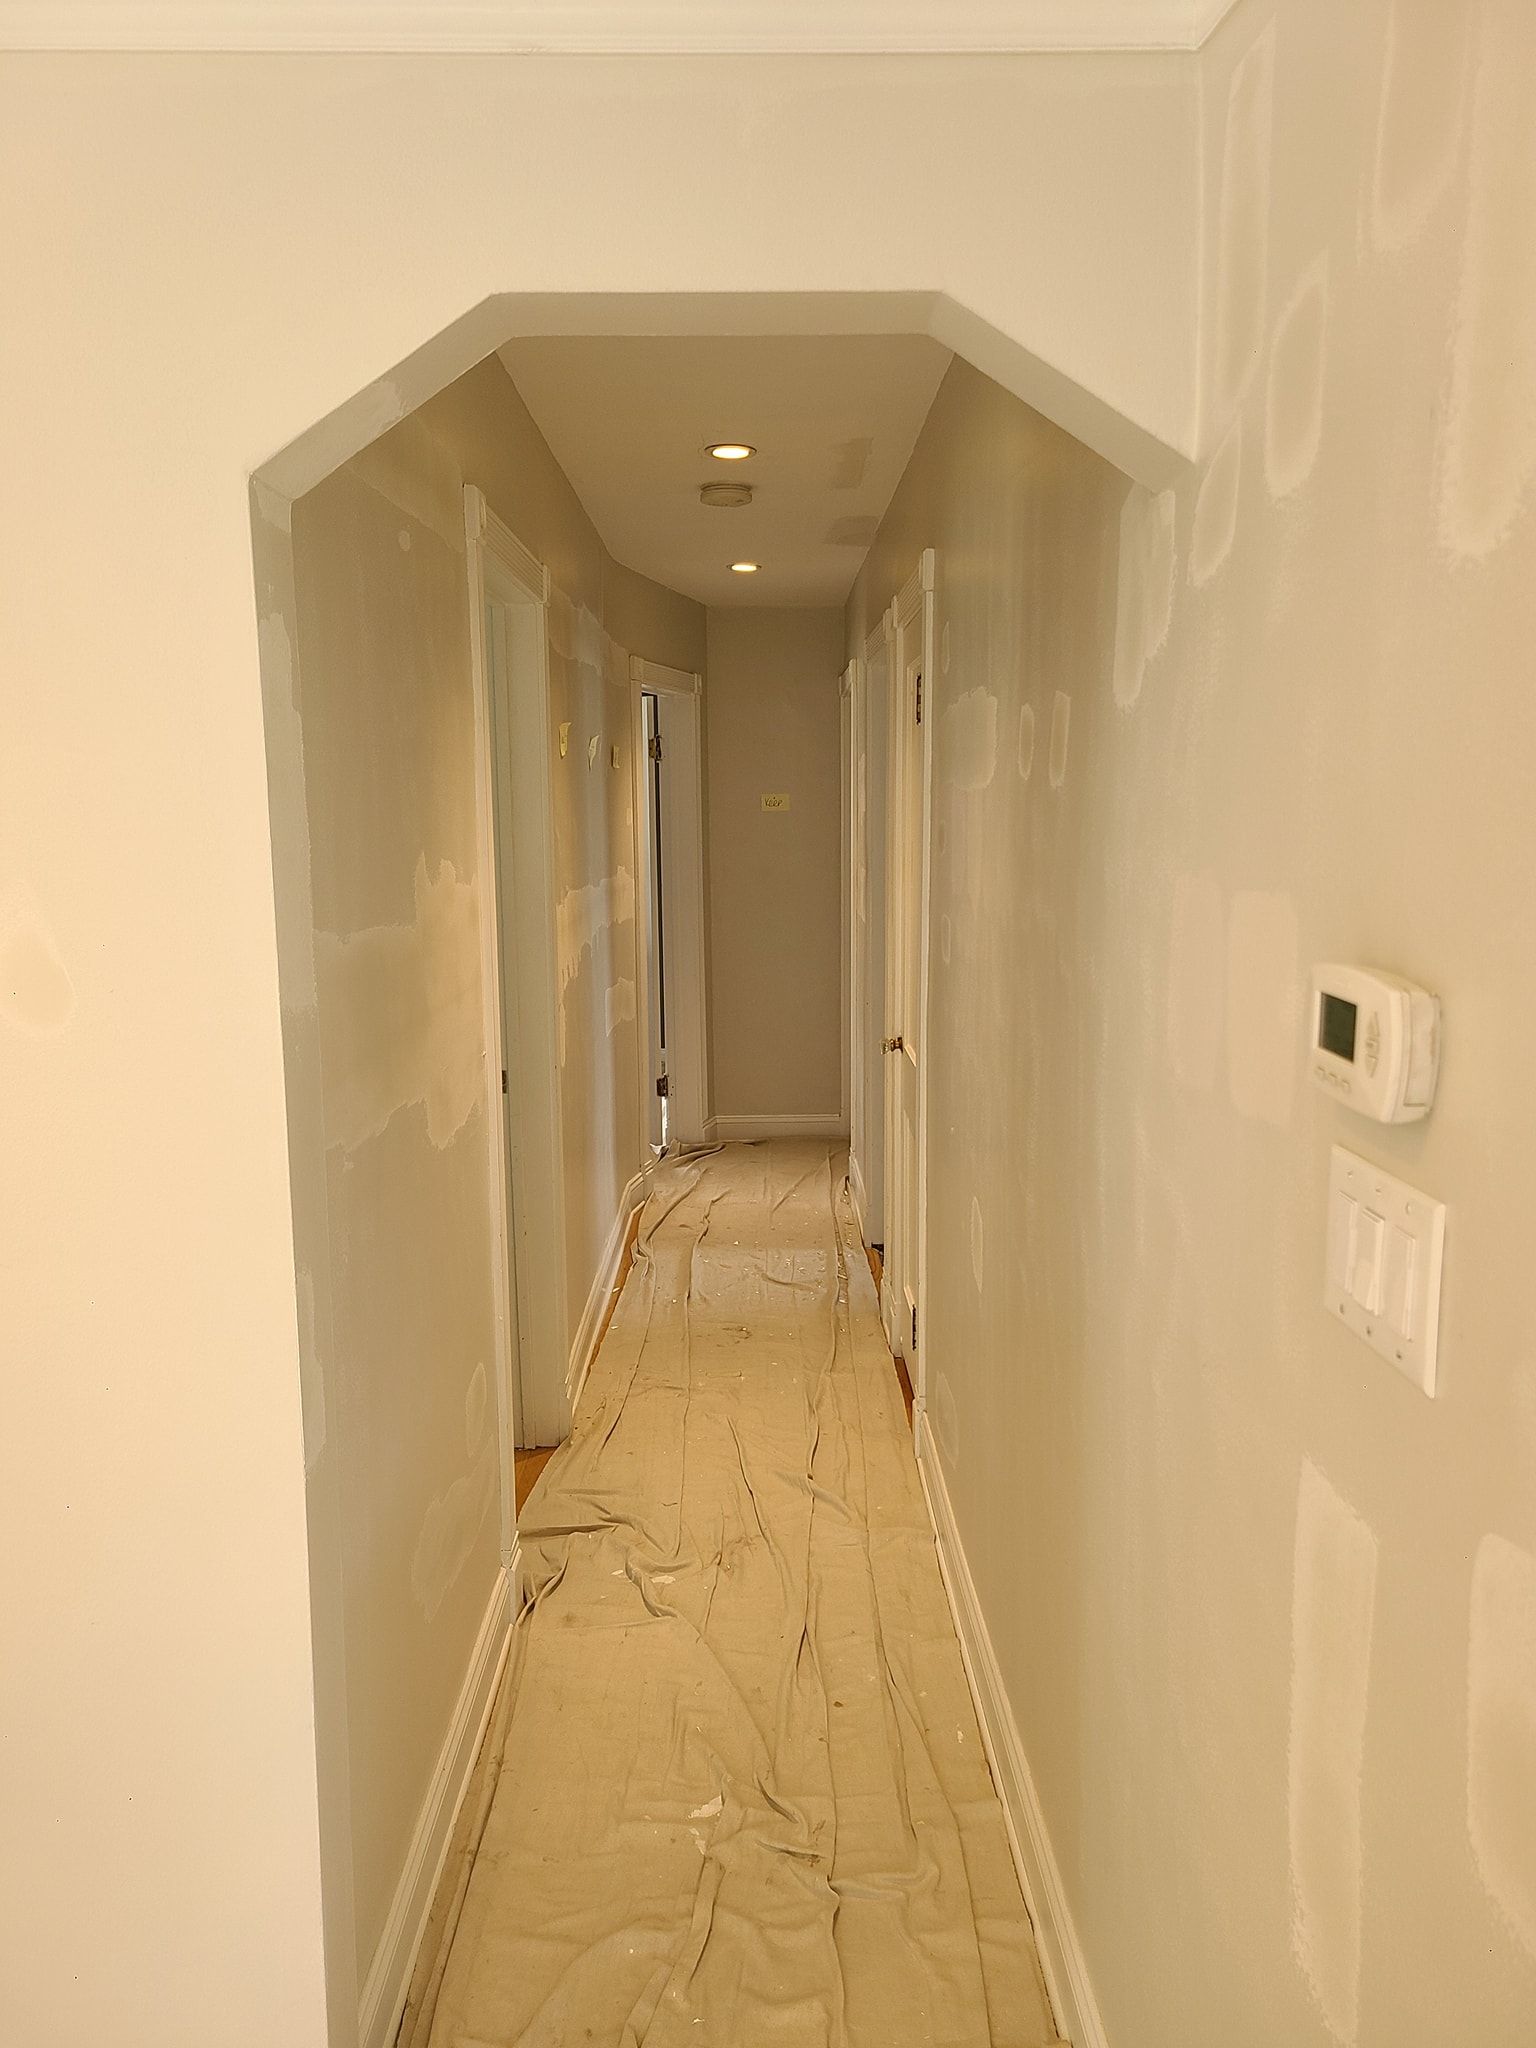 A long hallway with a thermostat on the wall.